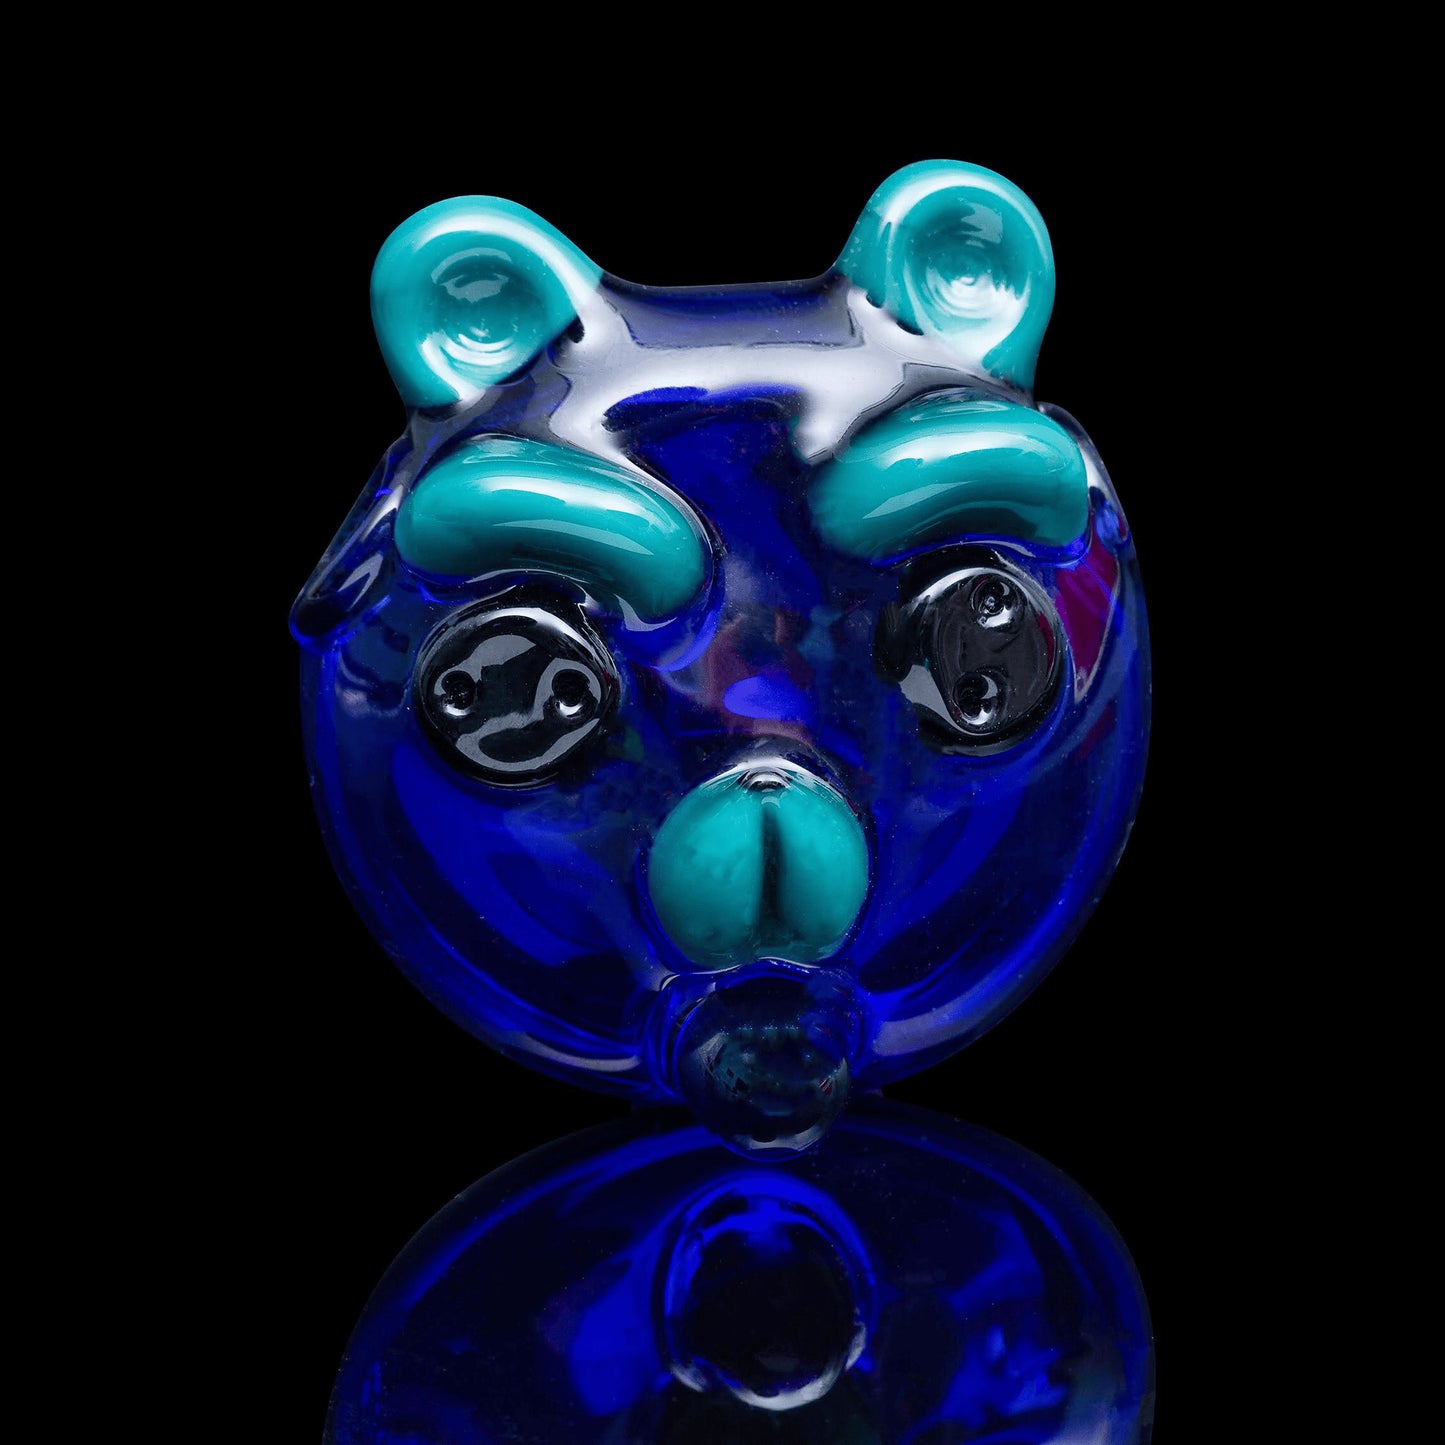 artisan-crafted glass pendant - Bear Pendant by Shurlockholm (A) (DFO)